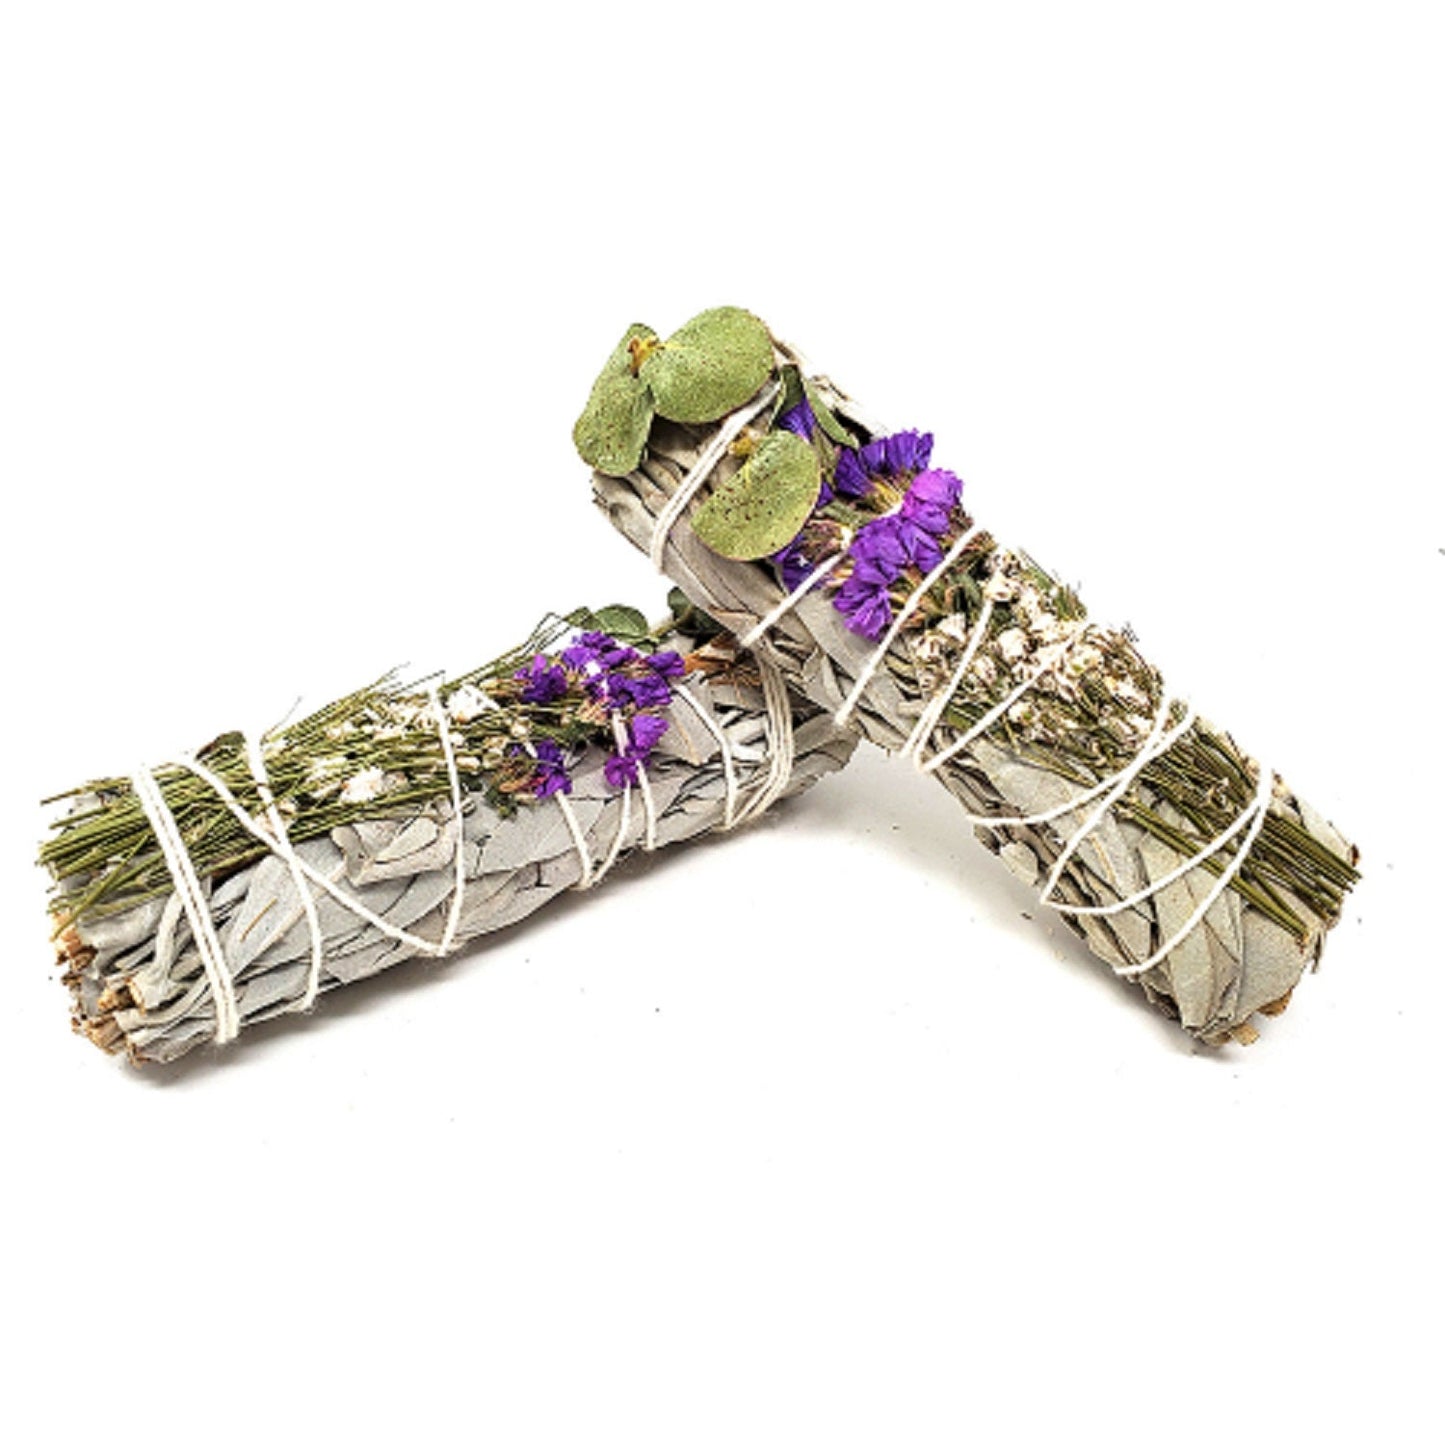 This Home Fragrance Floral Sage -White Sage, Eucalyptus, Purple Sinuata & Lavender 4"- 1 Piece from Earth to Daisy is perfect for the modern plant mom in her indoor jungle! #plantsmakepeoplehappy